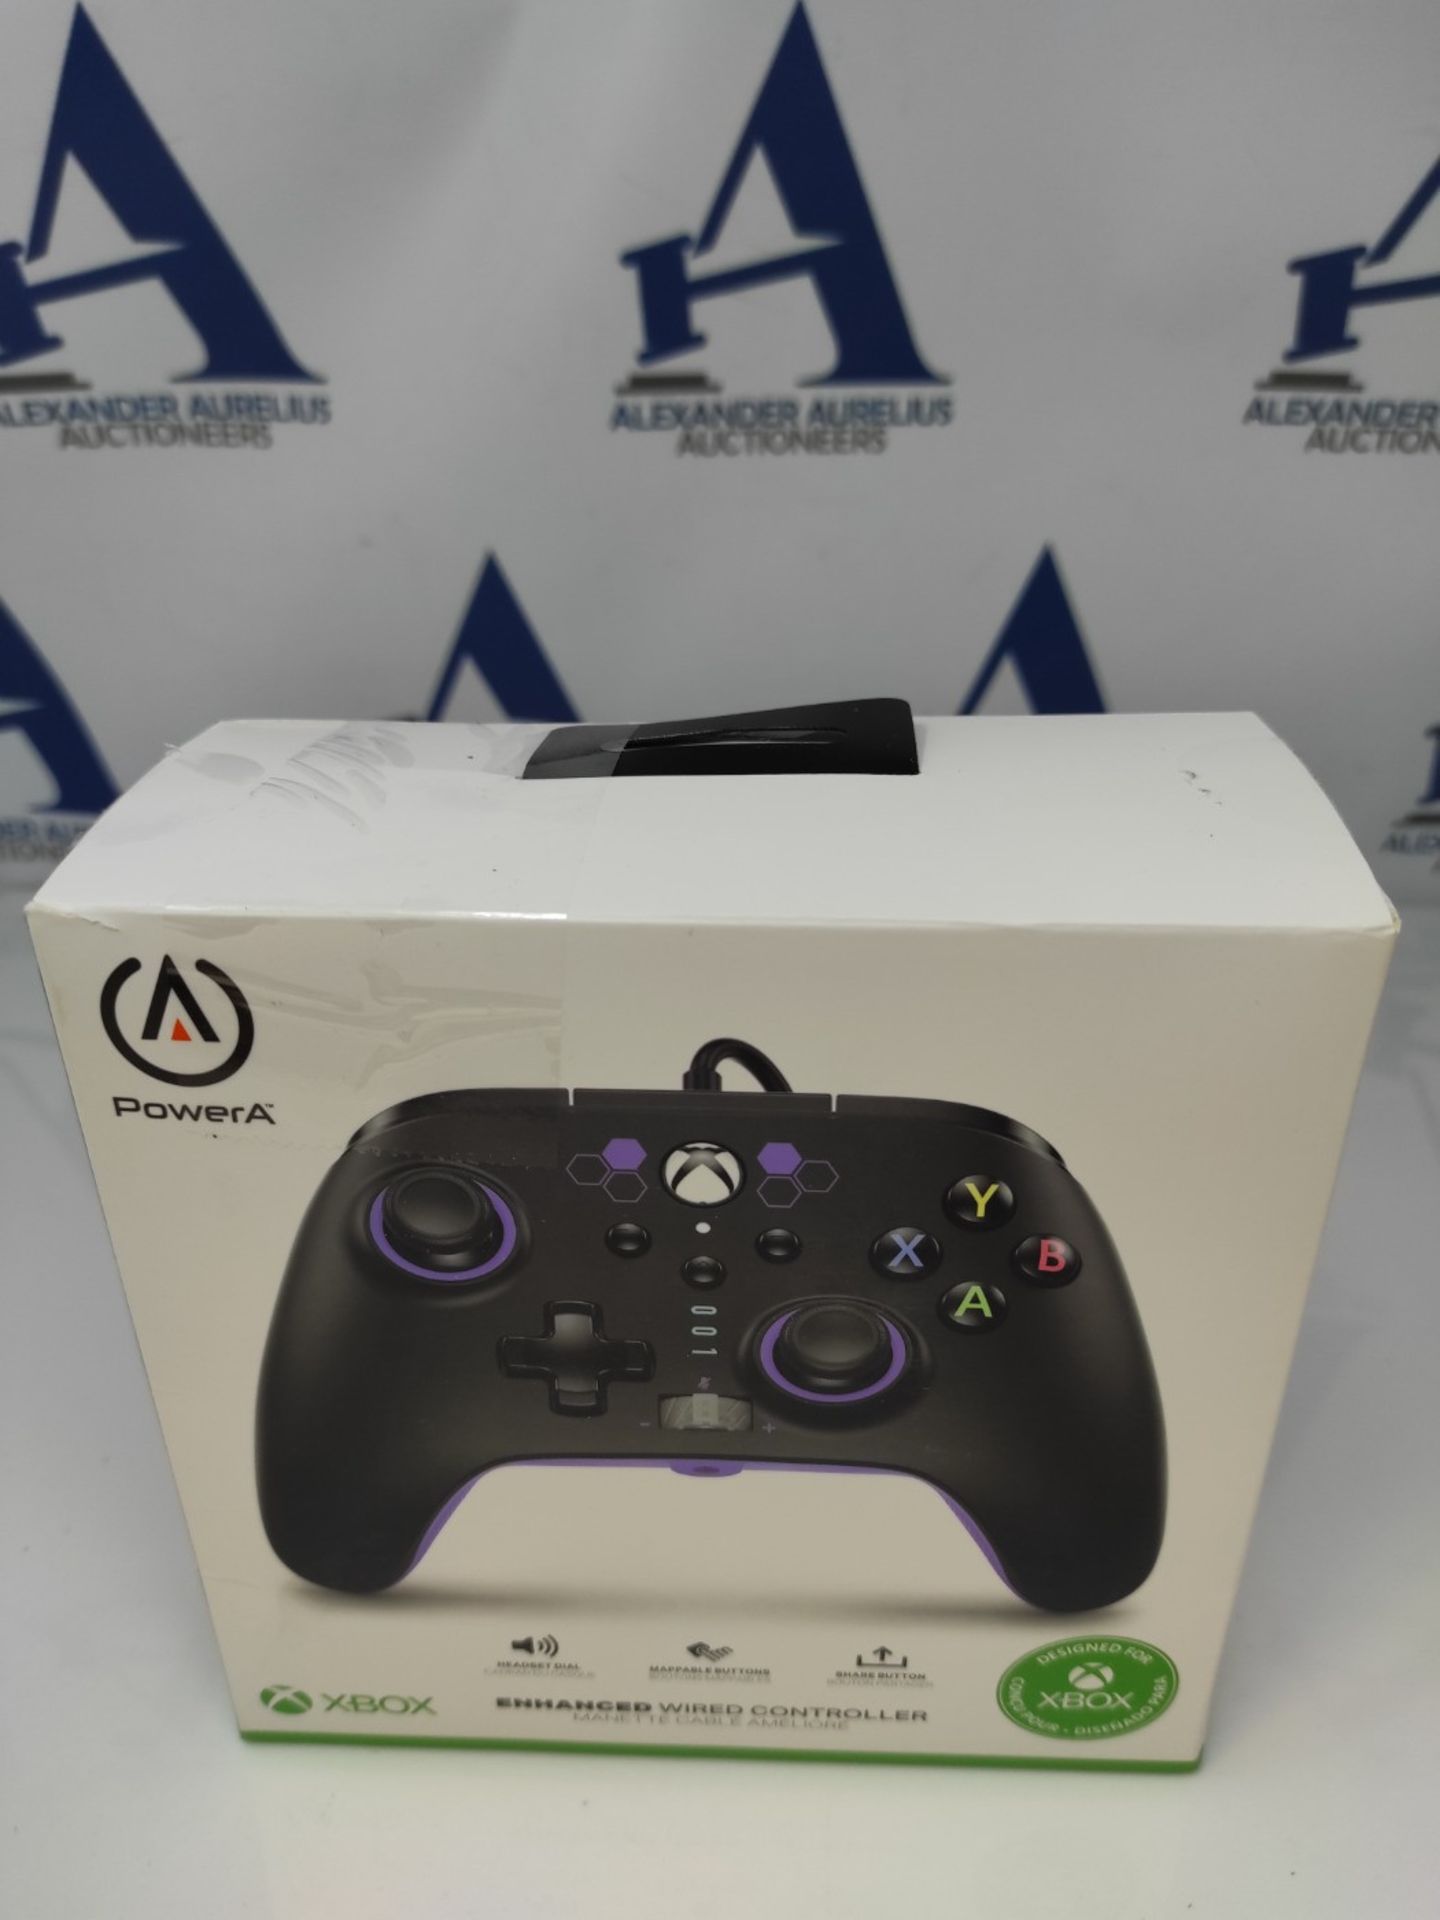 Advanced wired PowerA controller for Xbox Series X|S - Purple Hex - Image 2 of 3